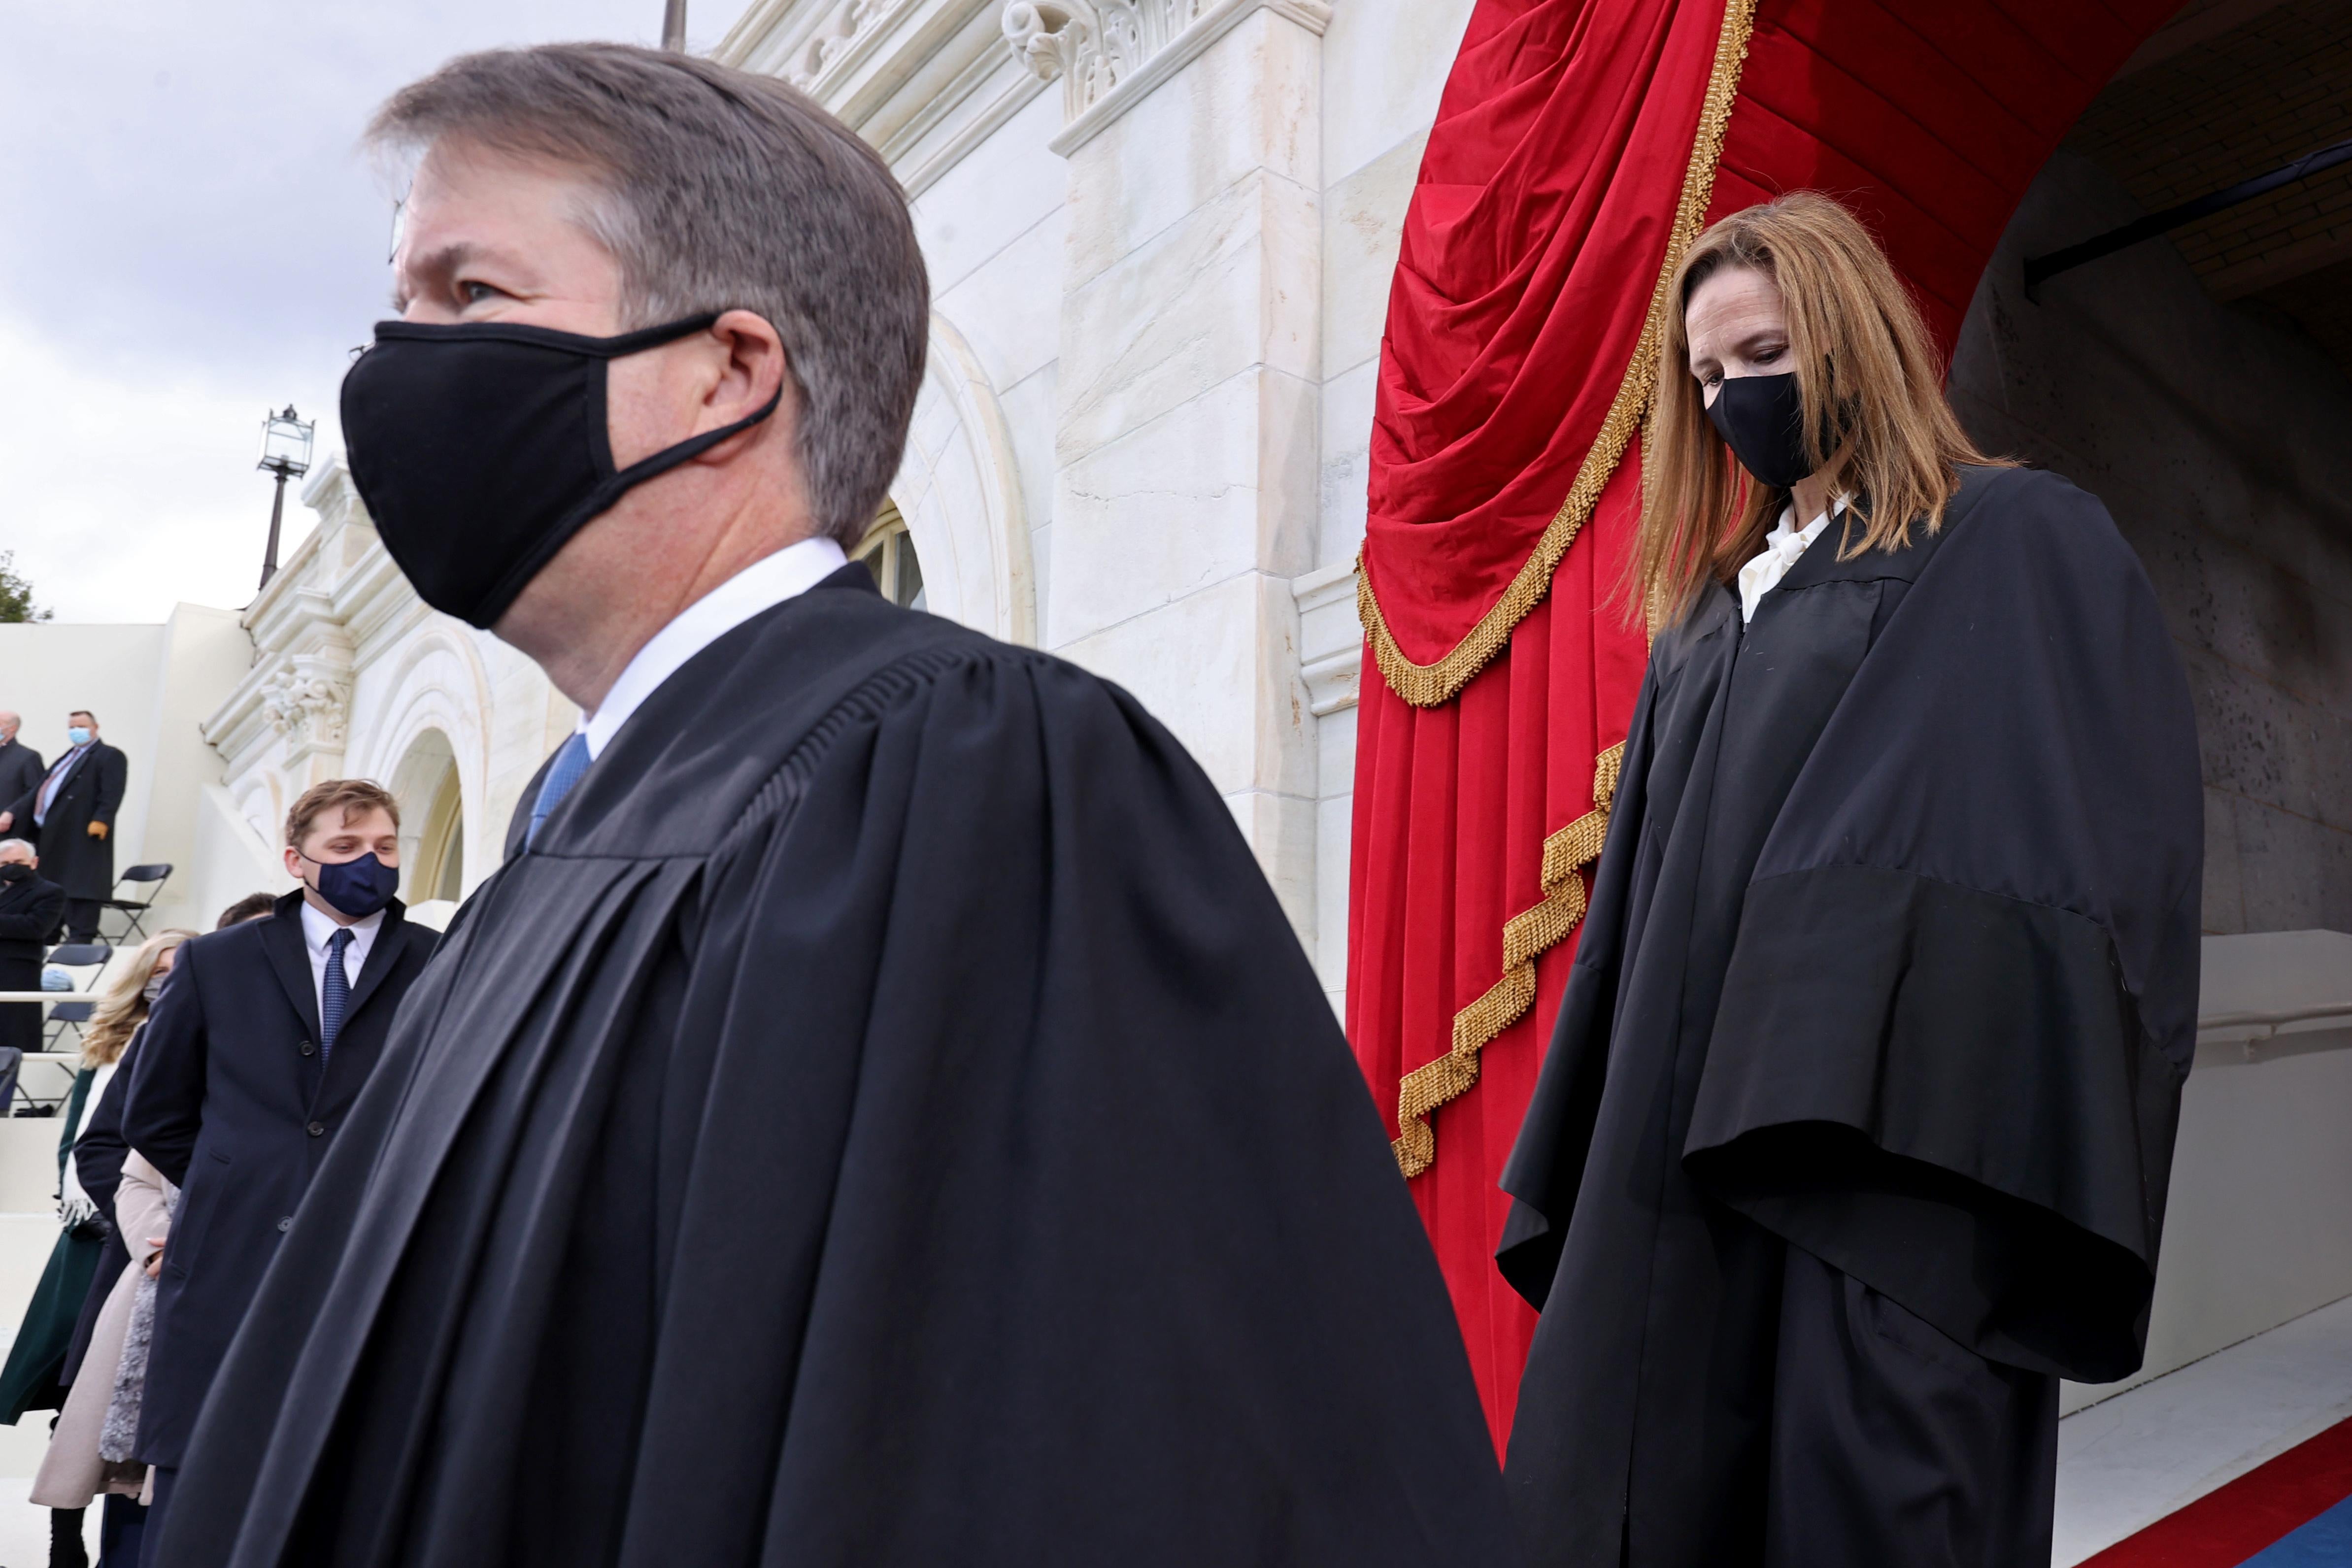 Kavanaugh and Barrett, both wearing robes and black masks, walking toward the inauguration stage at the Capitol